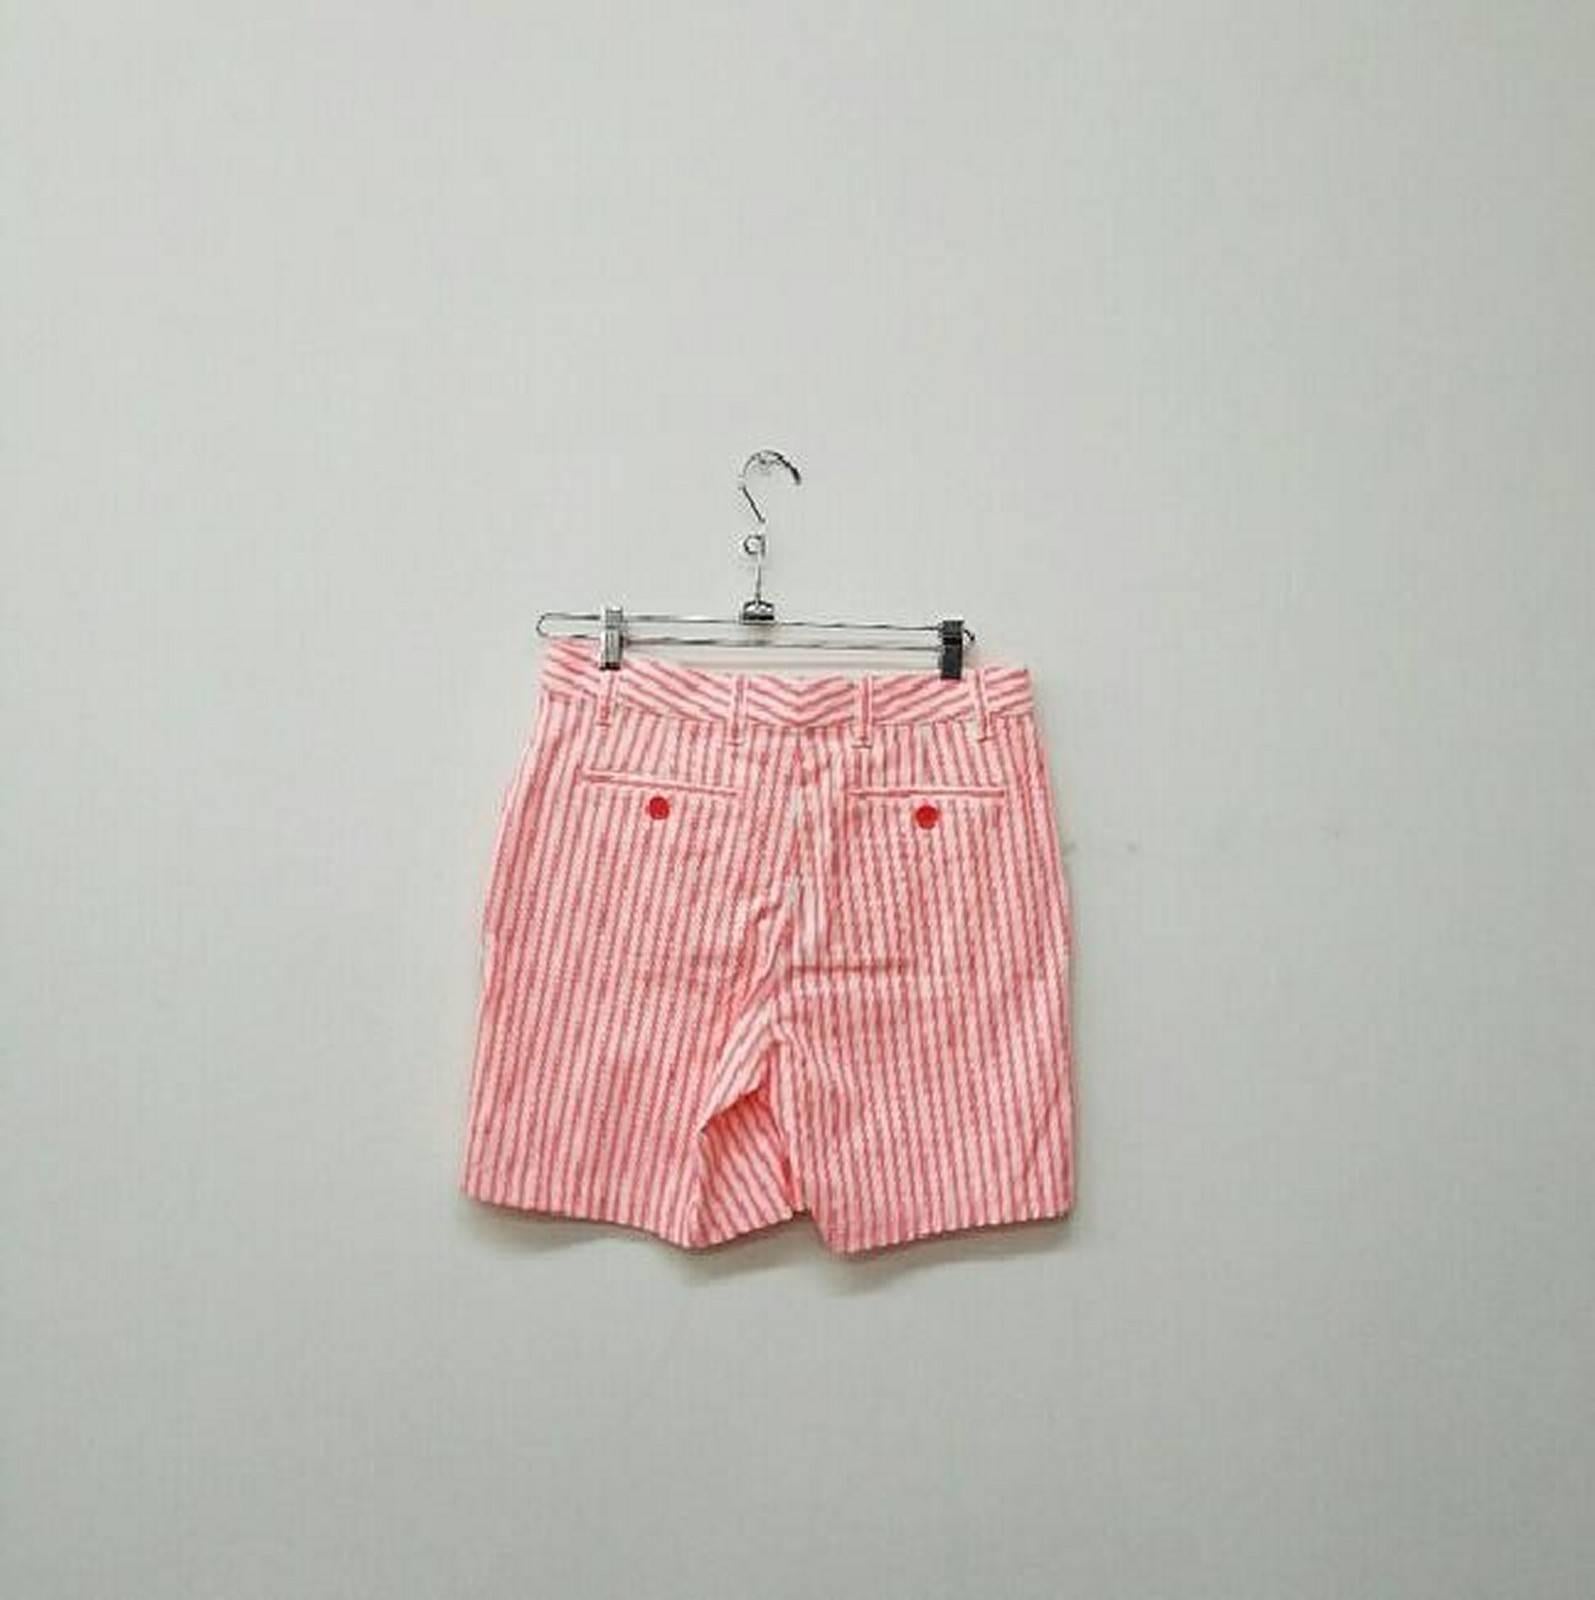 Brown Marc by Marc Jacobs Striped Shorts - Size: 4 (S, 27) For Sale